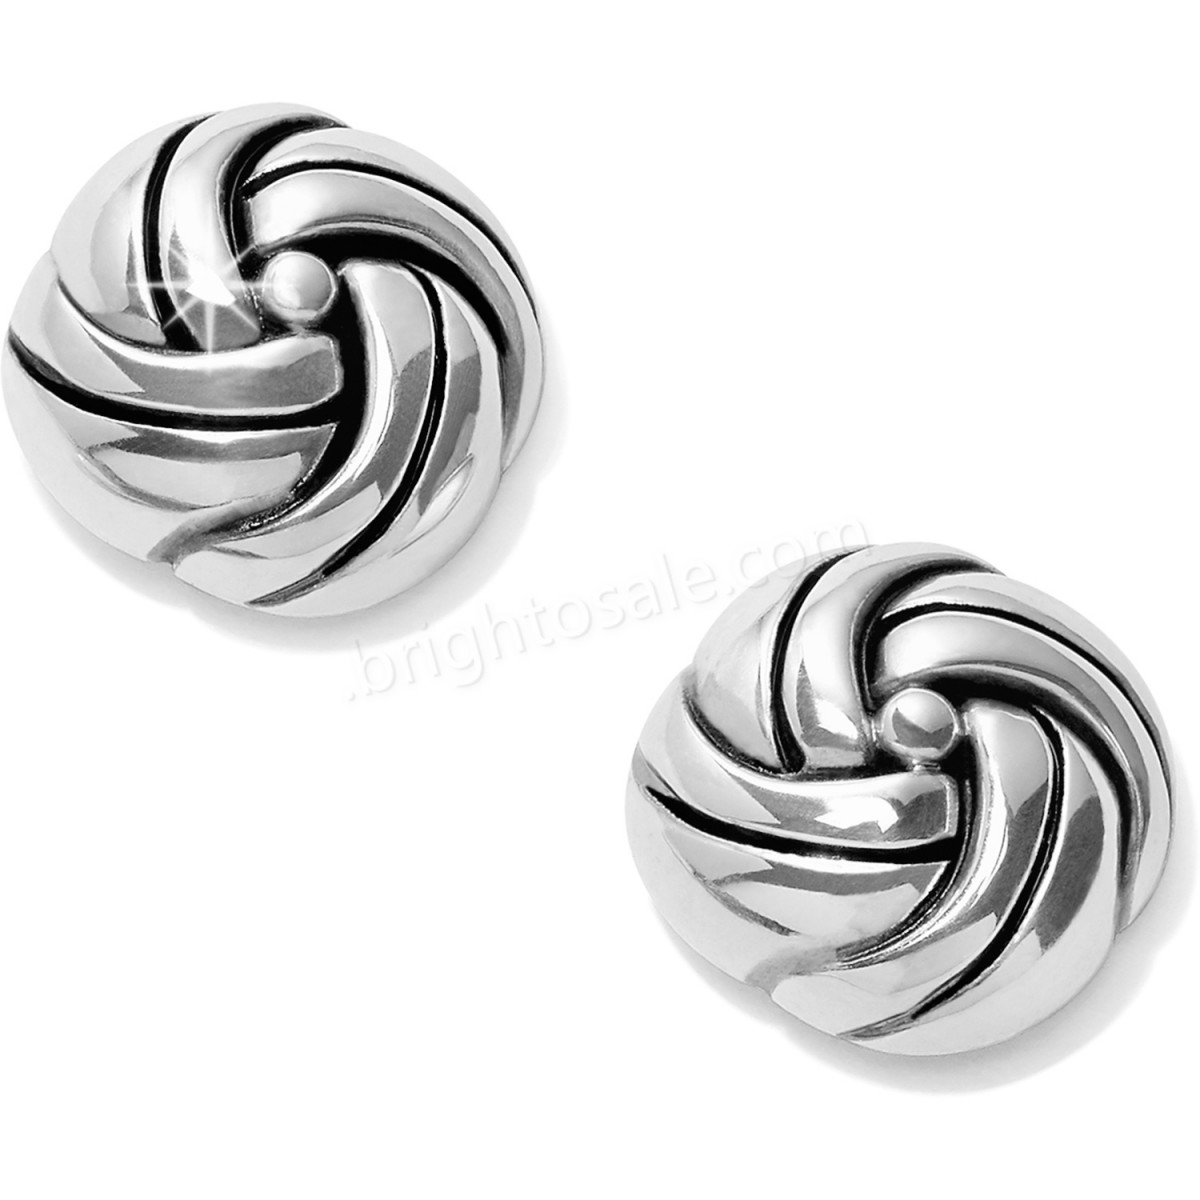 Brighton Collectibles & Online Discount Interlok Knot Post Earrings - -0